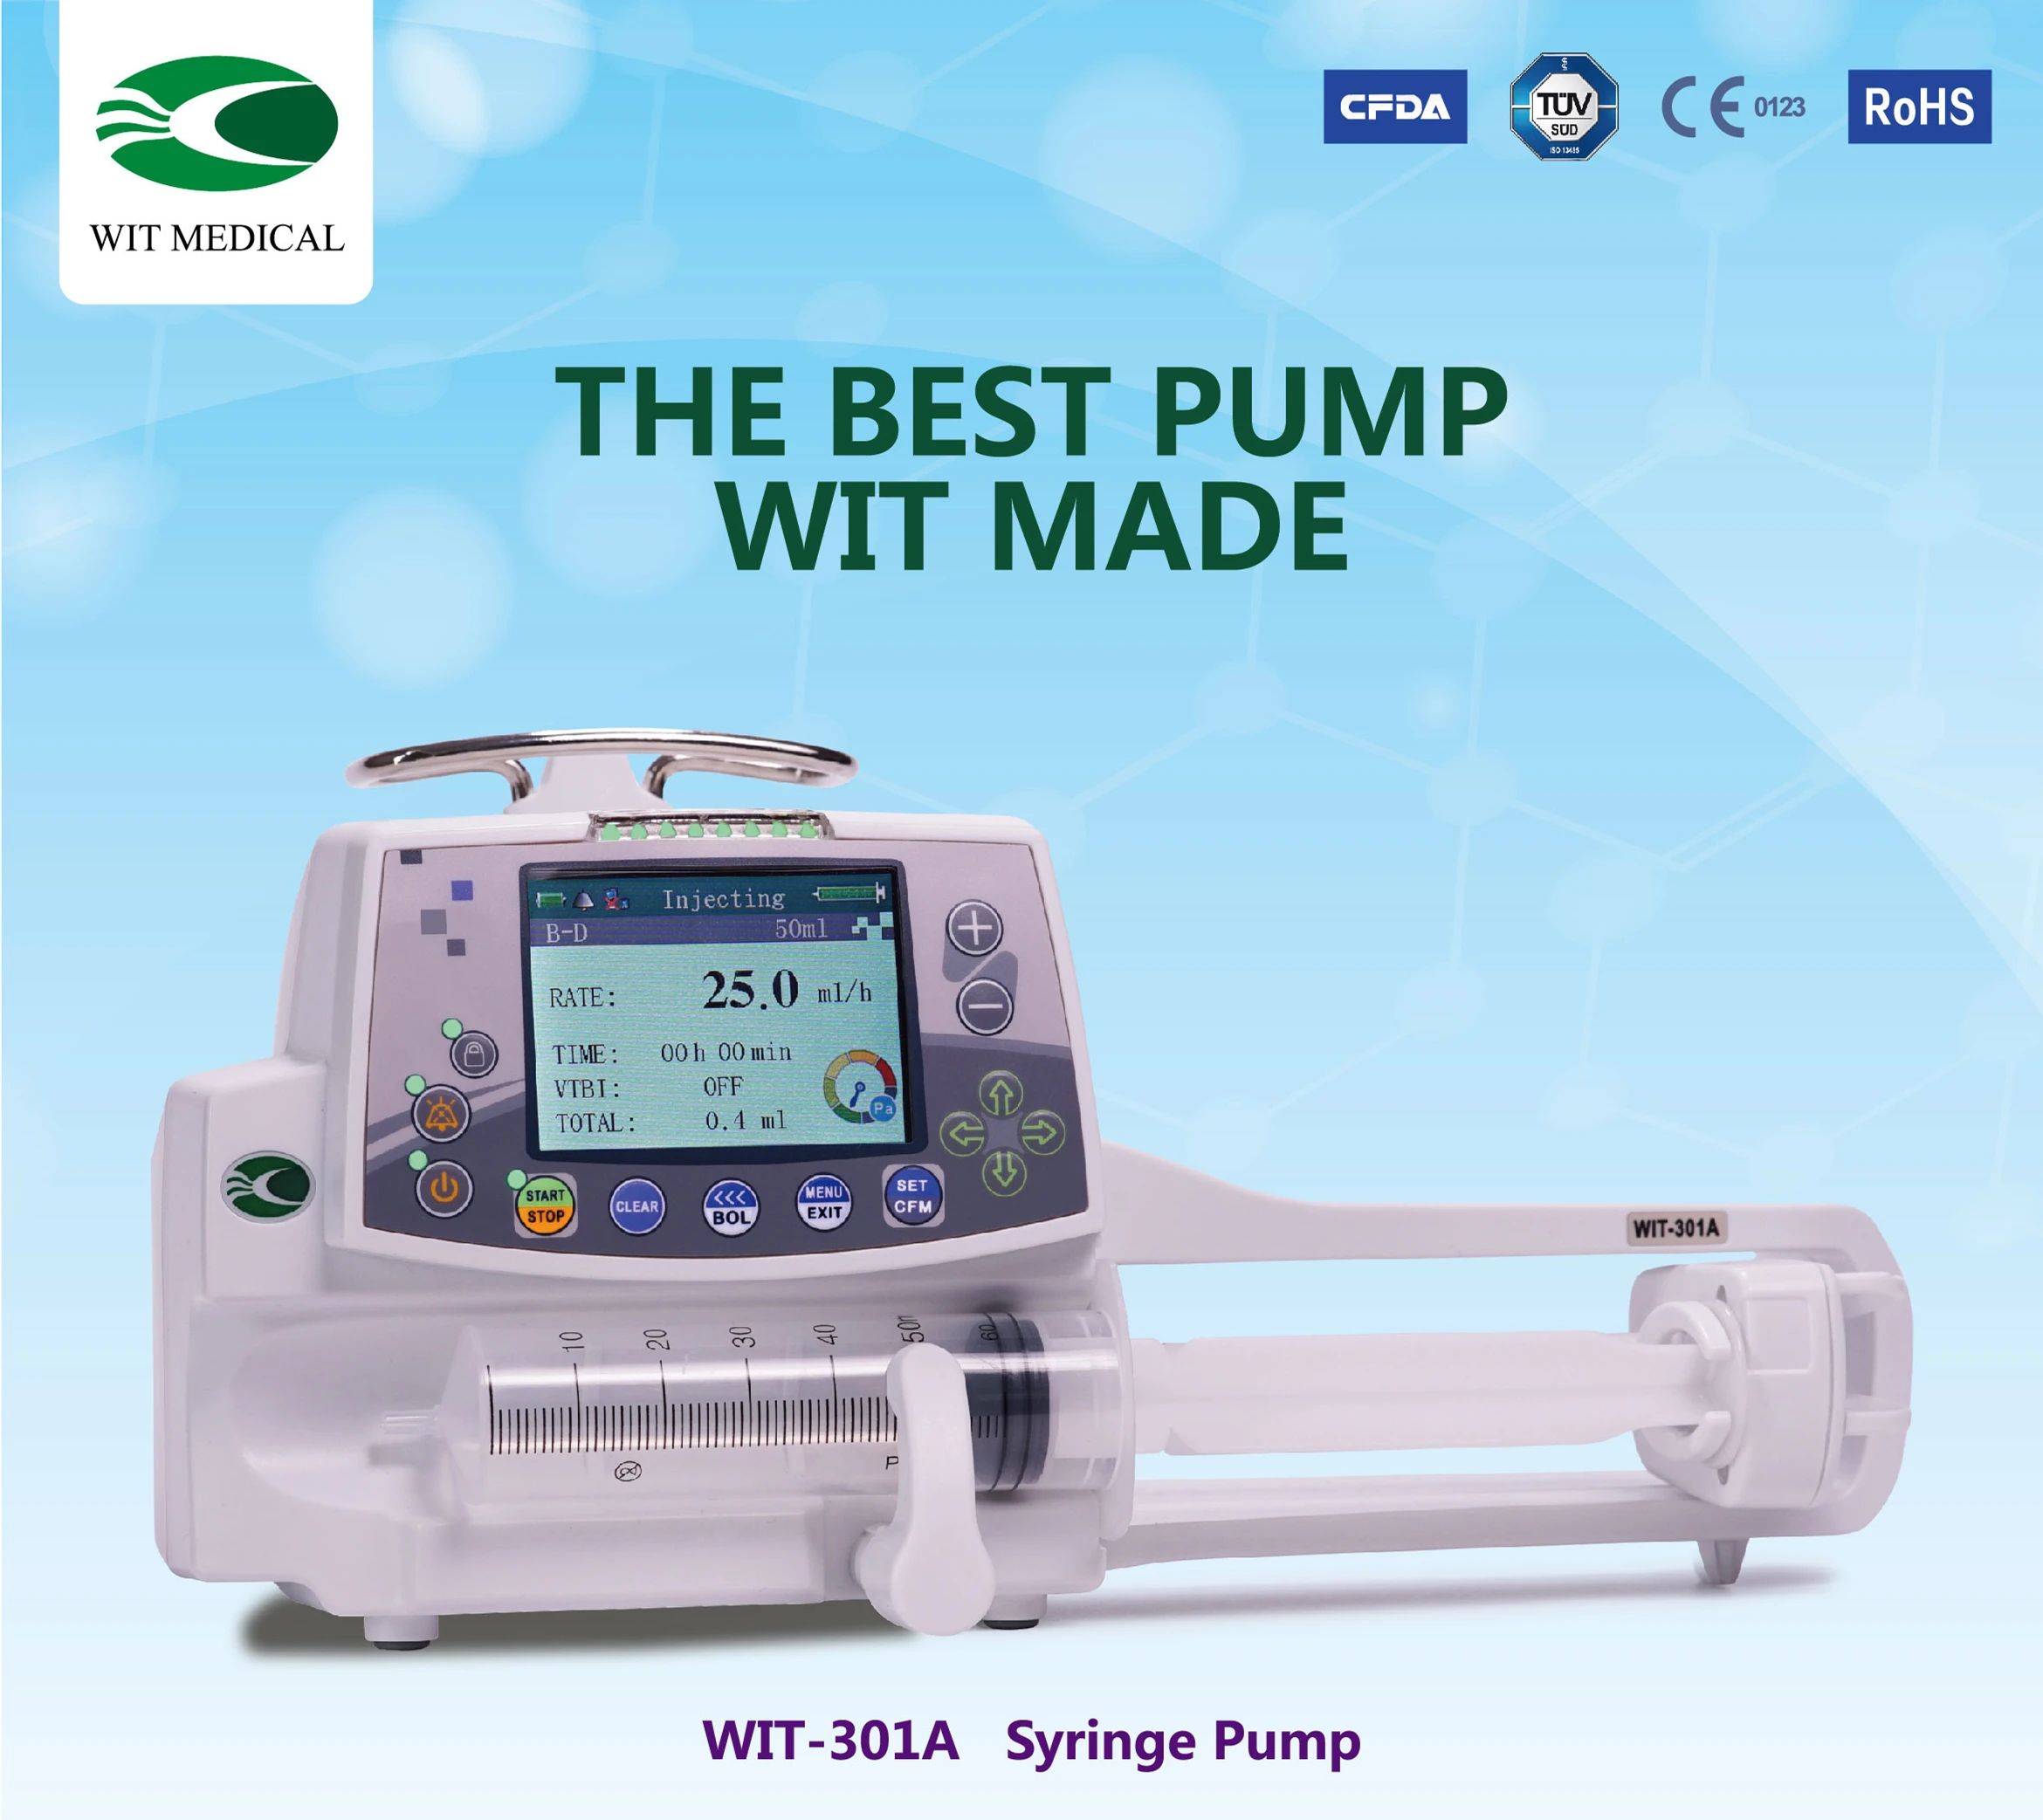 

Factory Store - Syringe Pump WIth TIVA European Standard TUV CE & ISO13485, RoHS Certificate, White